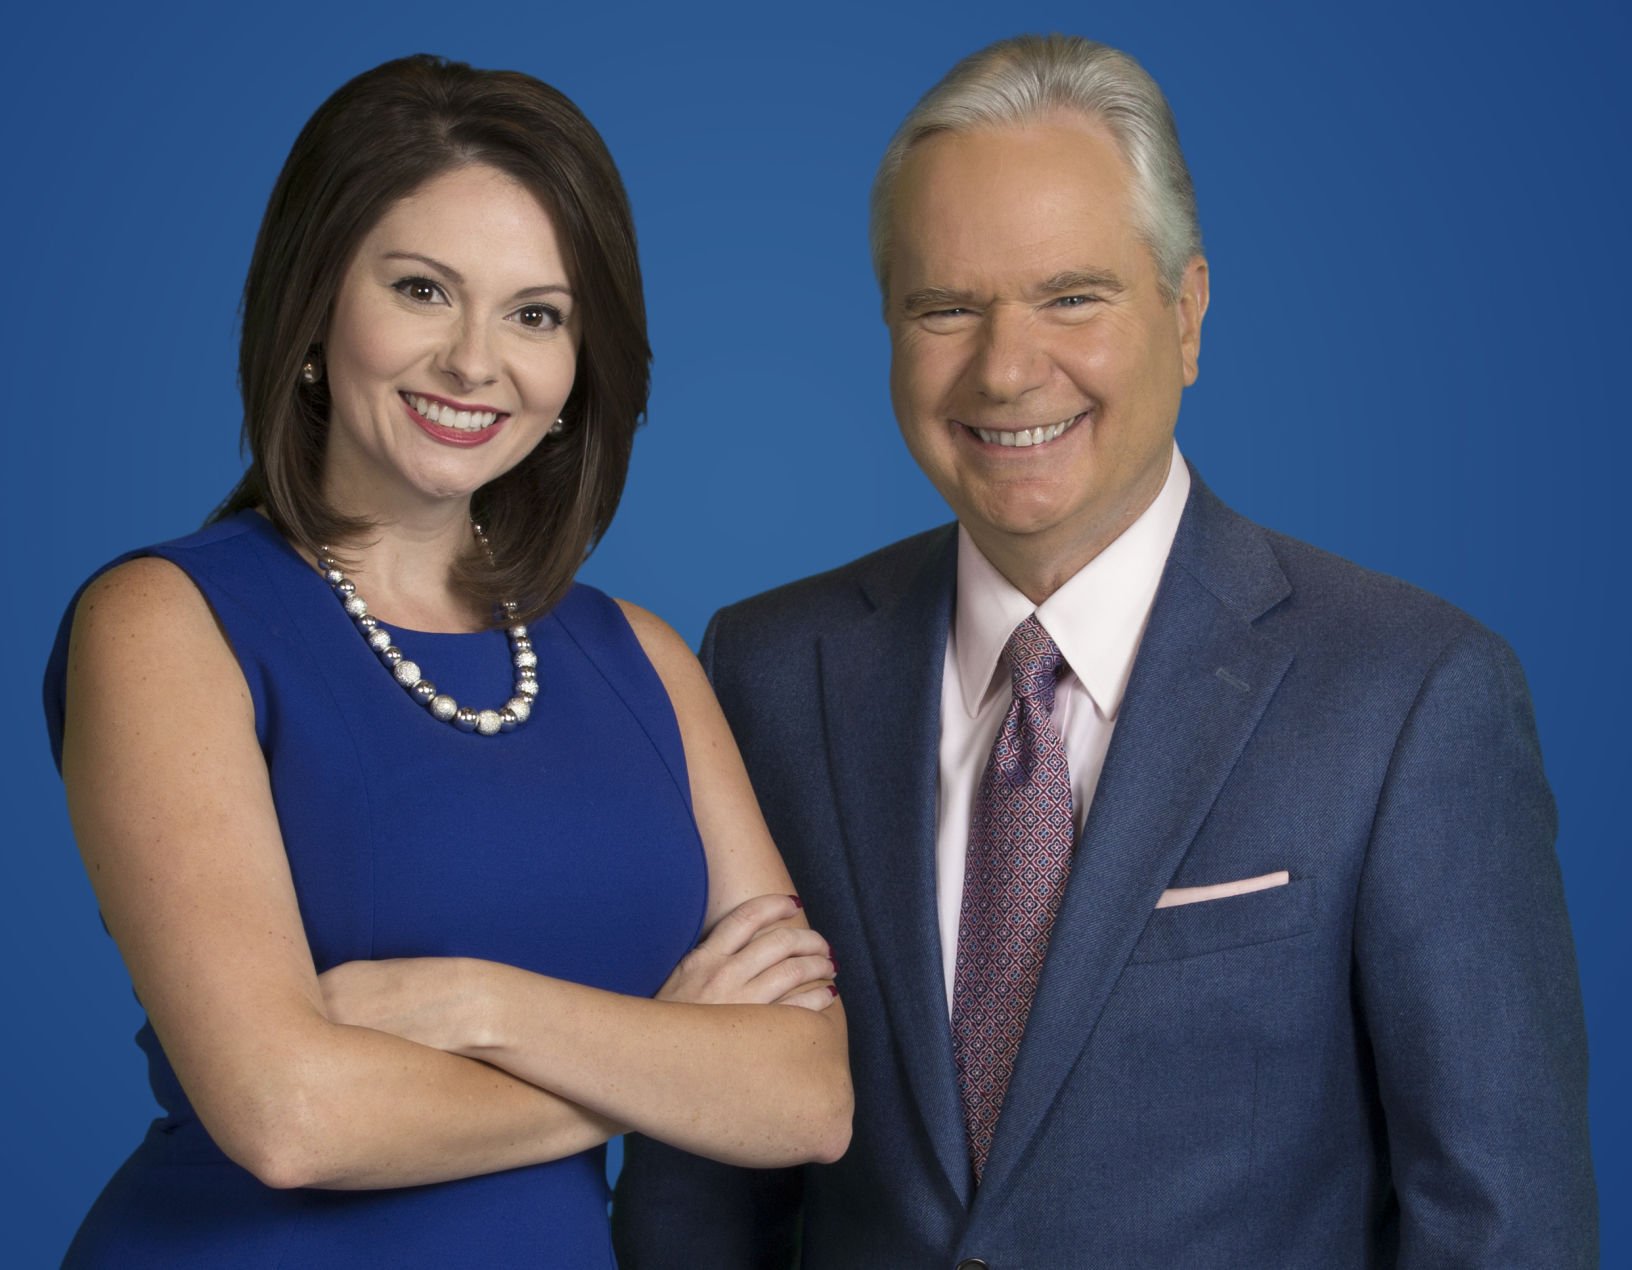 more-morning-news-to-2une-in-baton-rouge-thanks-to-wbrz